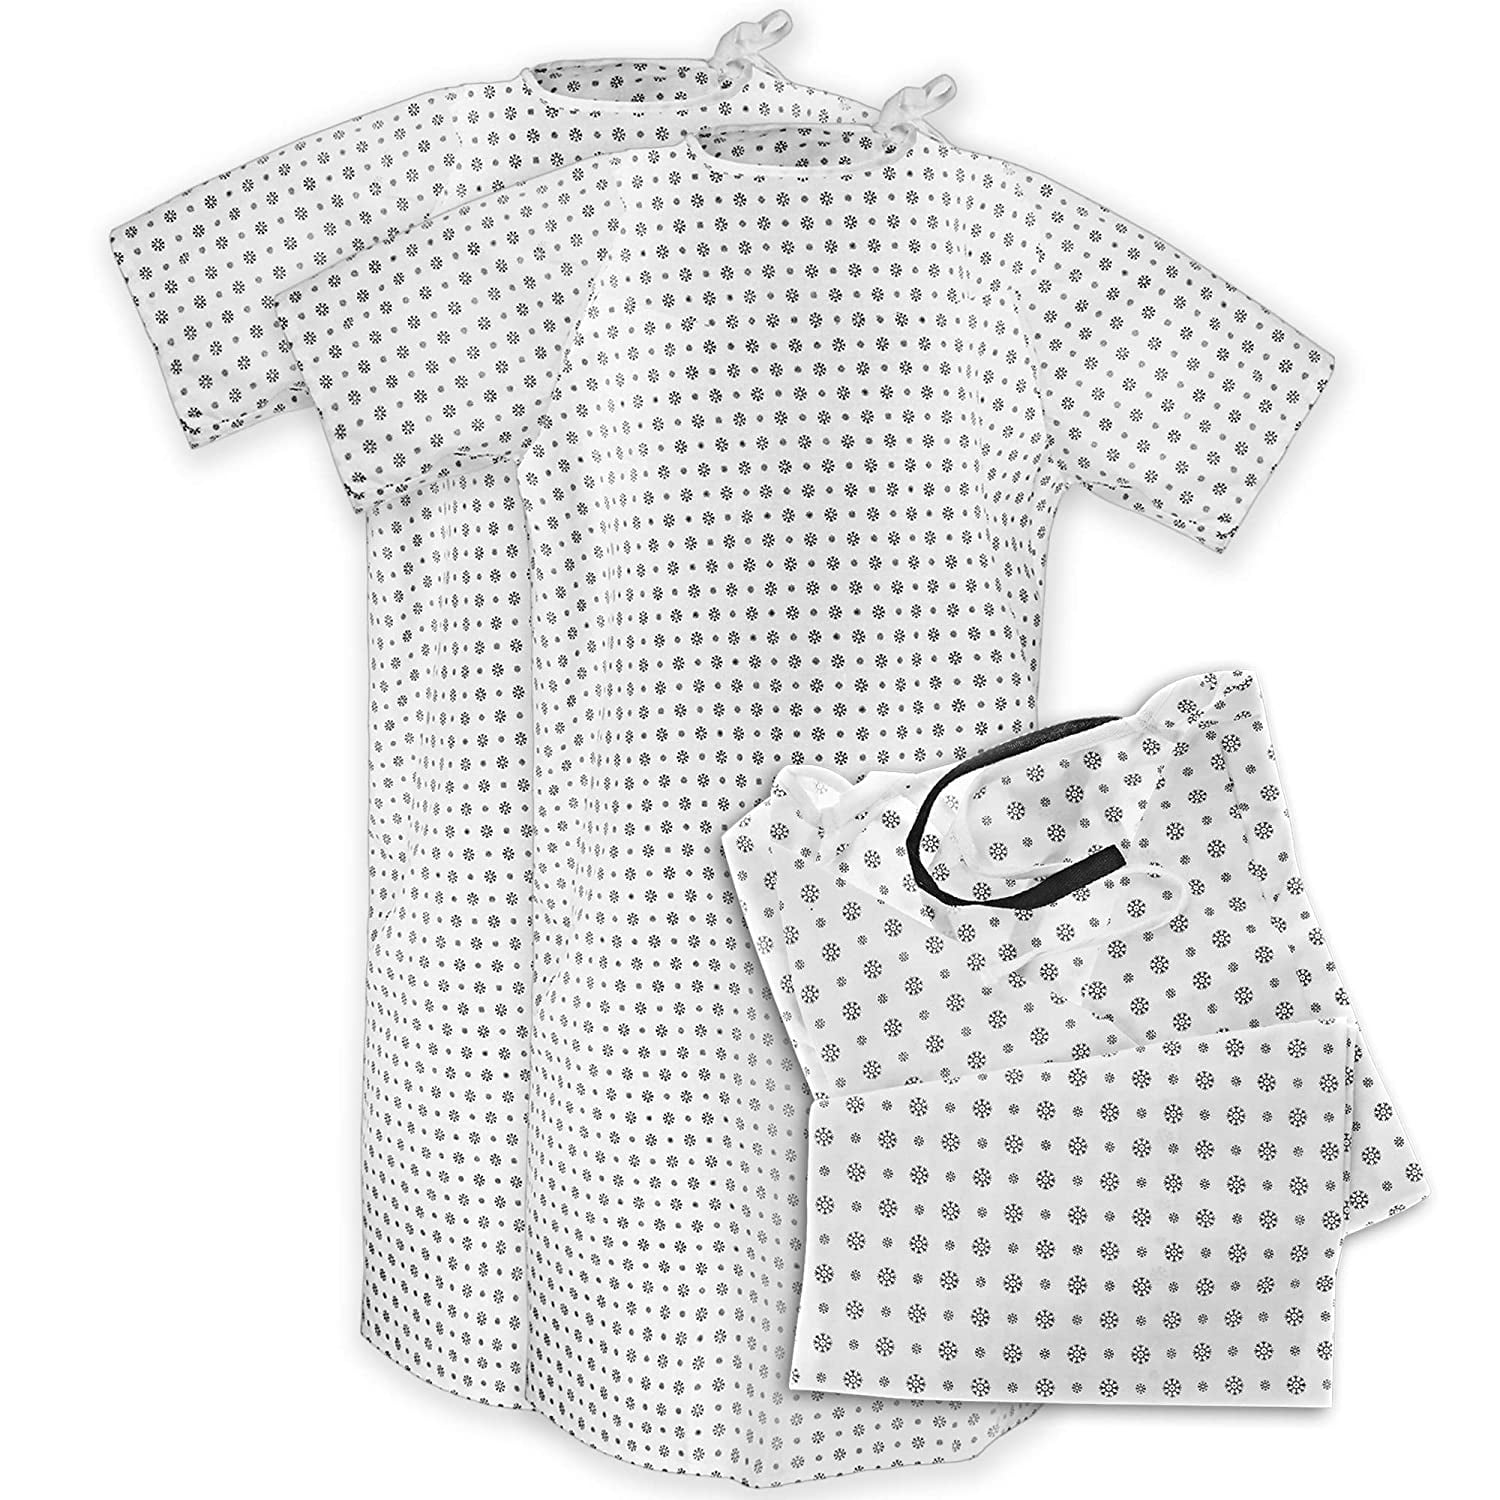 Magnus Care Hospital Gown for Woman & Men, Cotton Blend India | Ubuy